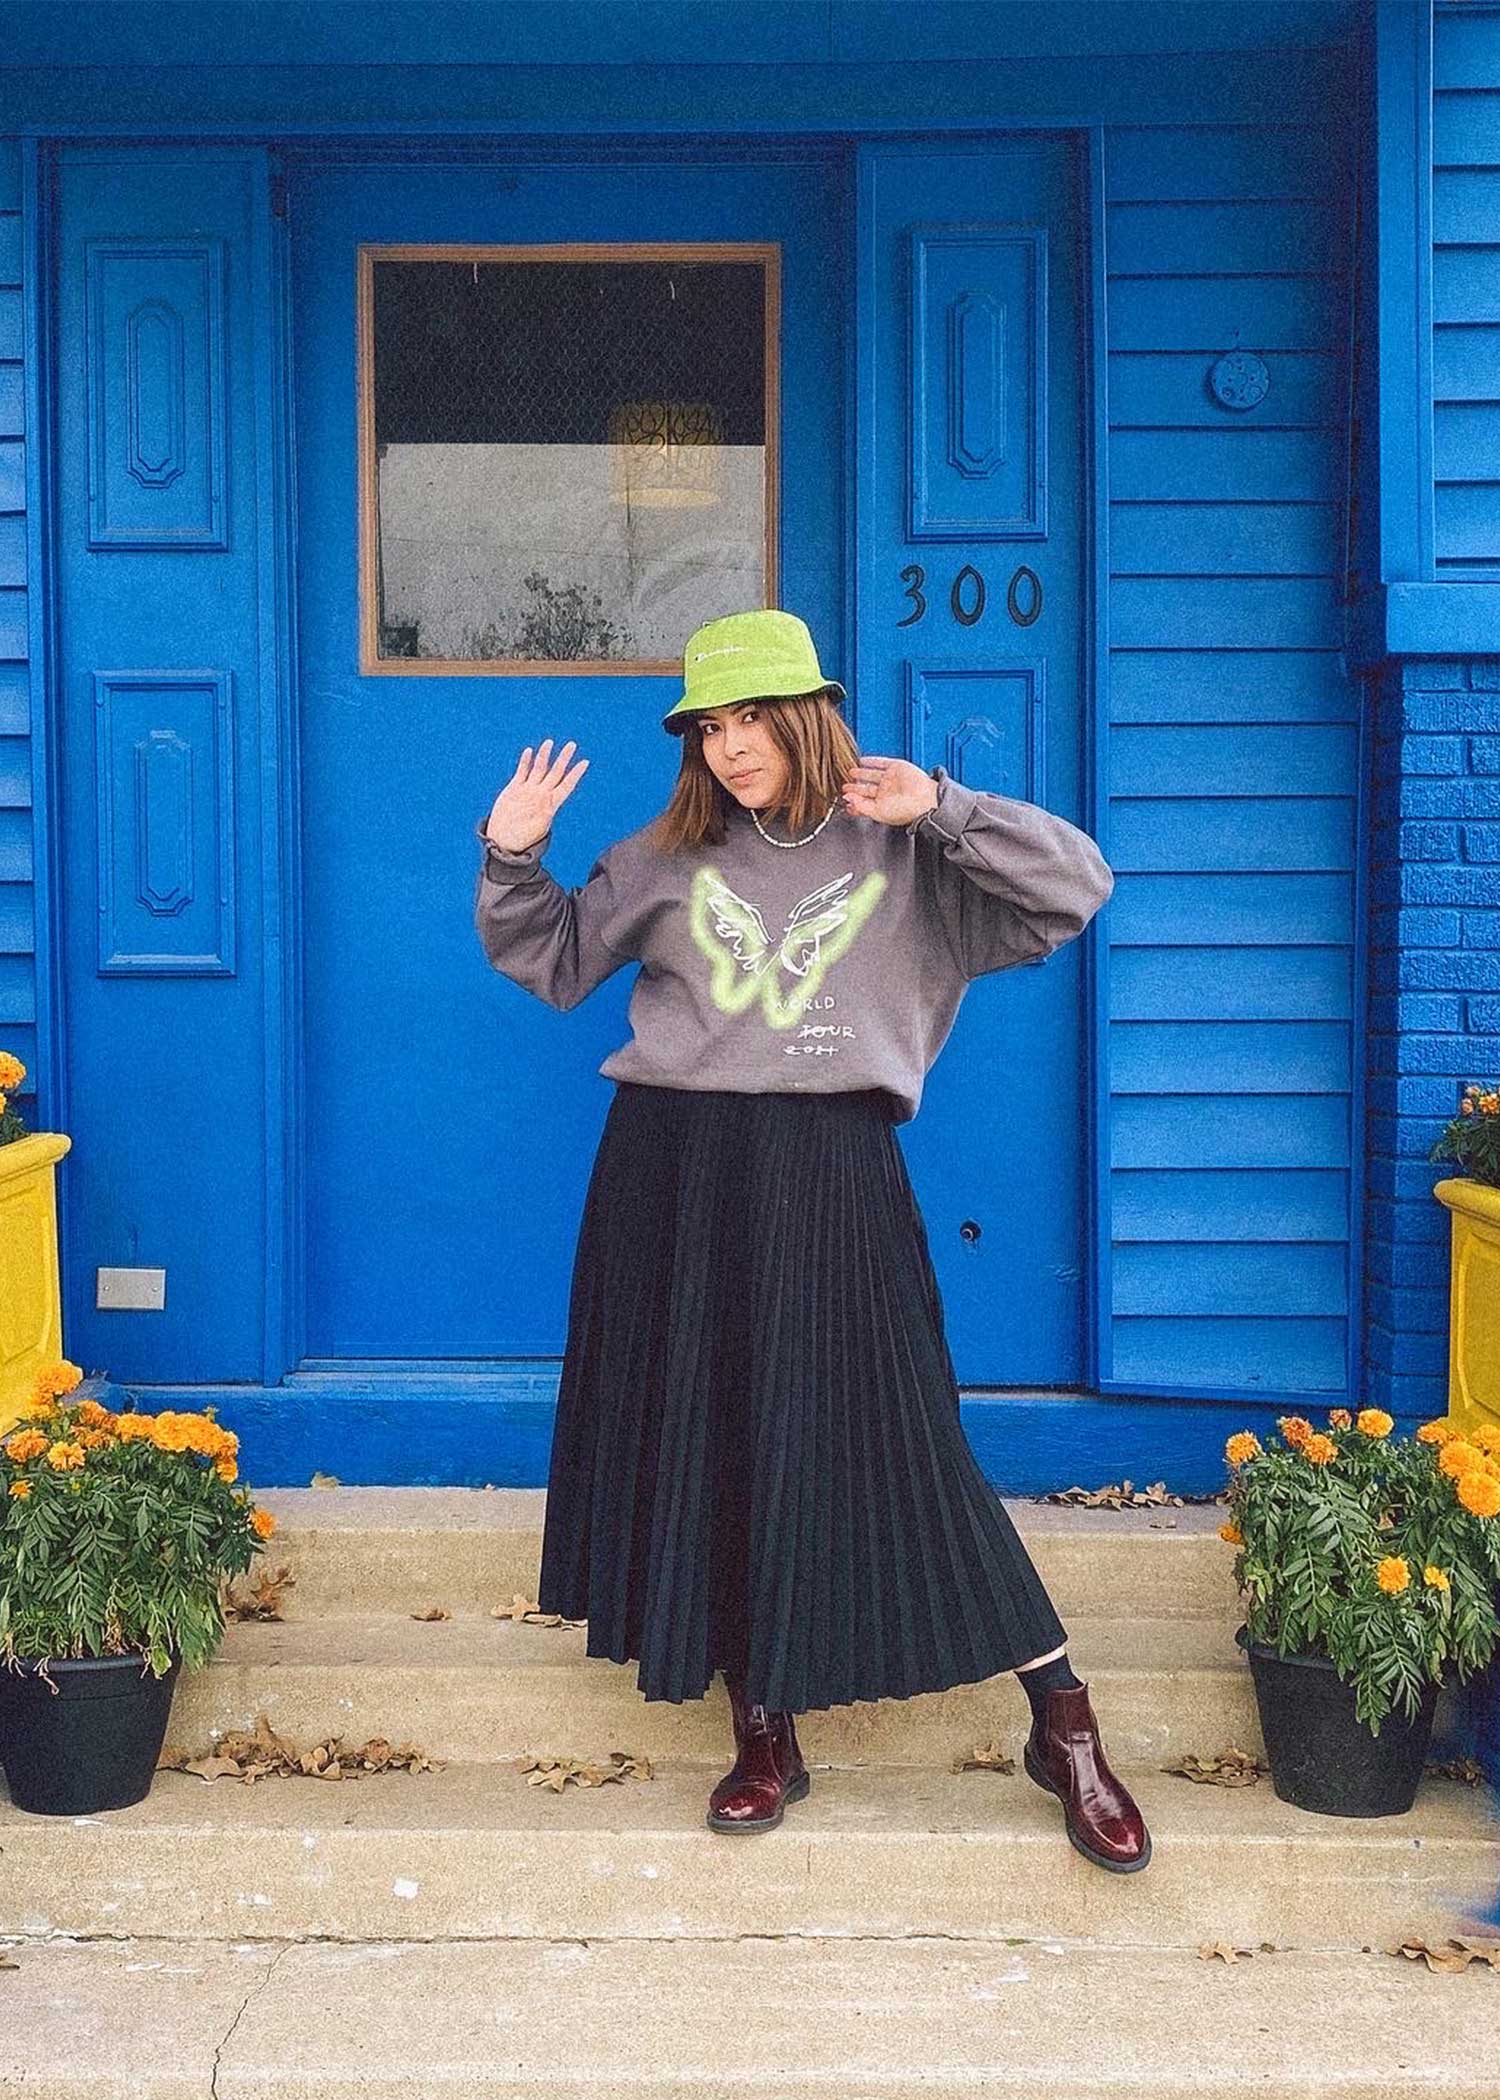 girl posing in front of a bright blue building wearing a maxi skirt, a sweatshirt and a bucket hat